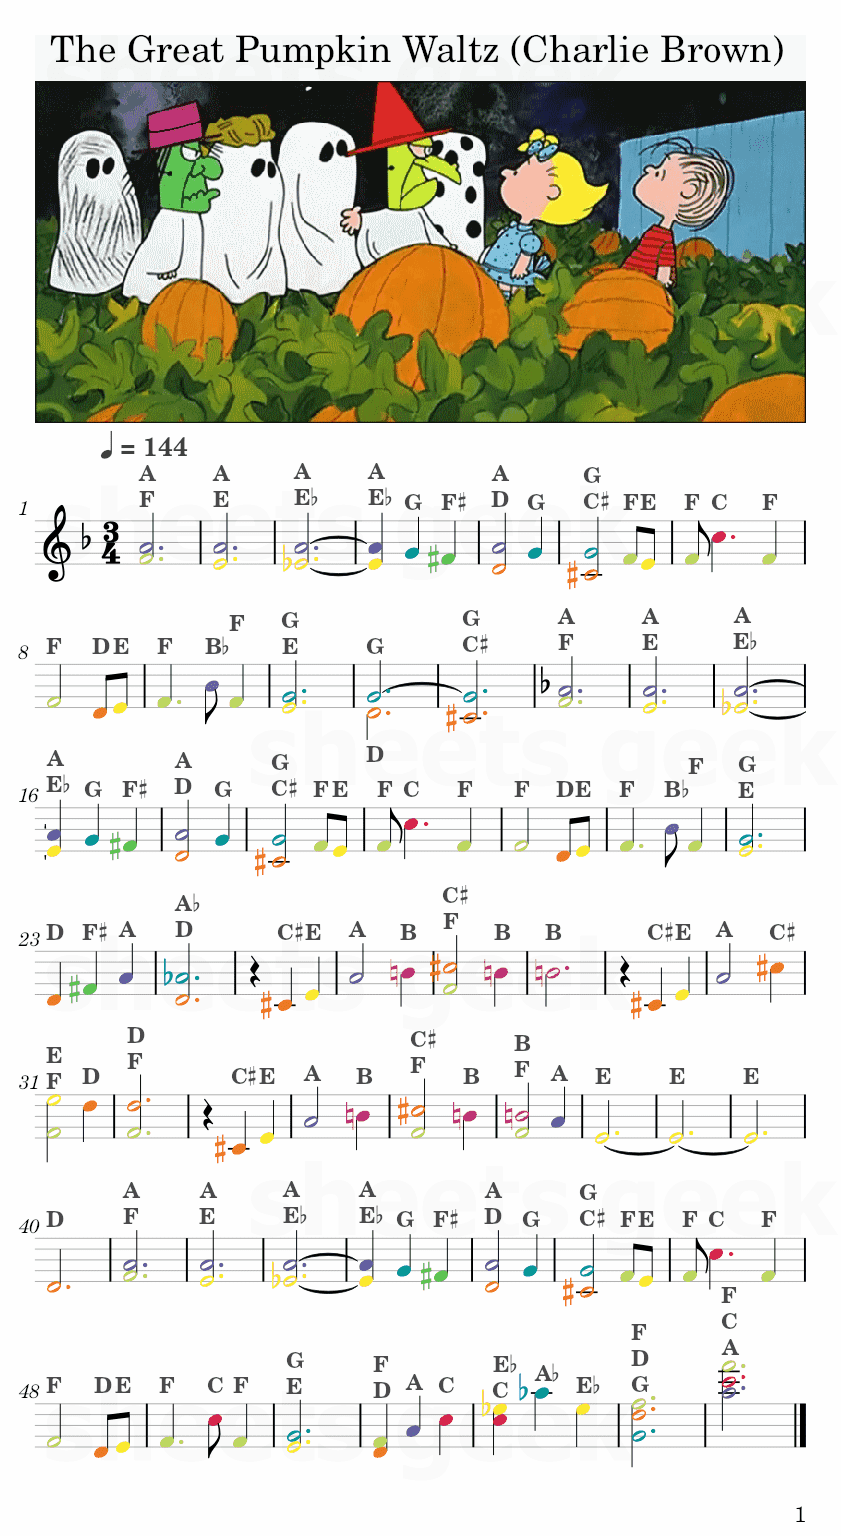 The Great Pumpkin Waltz - Vince Guaraldi Charlie Brown Easy Sheet Music Free for piano, keyboard, flute, violin, sax, cello page 1